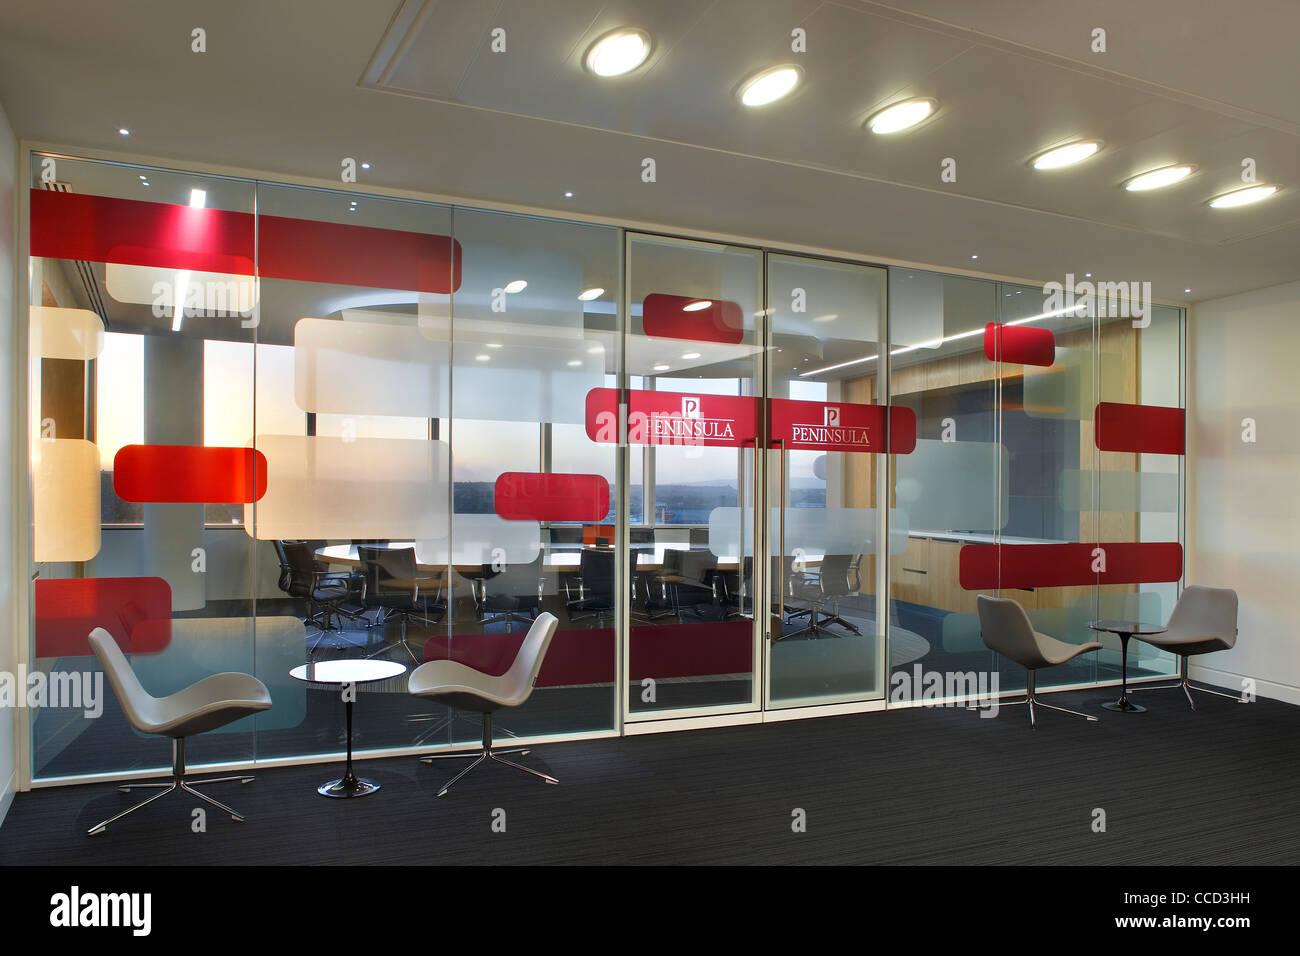 THE PENINSULA, ID:SR/SHEPPARD ROBSON, MANCHESTER, 2010, GLASS WALL WITH RED DESIGN Stock Photo